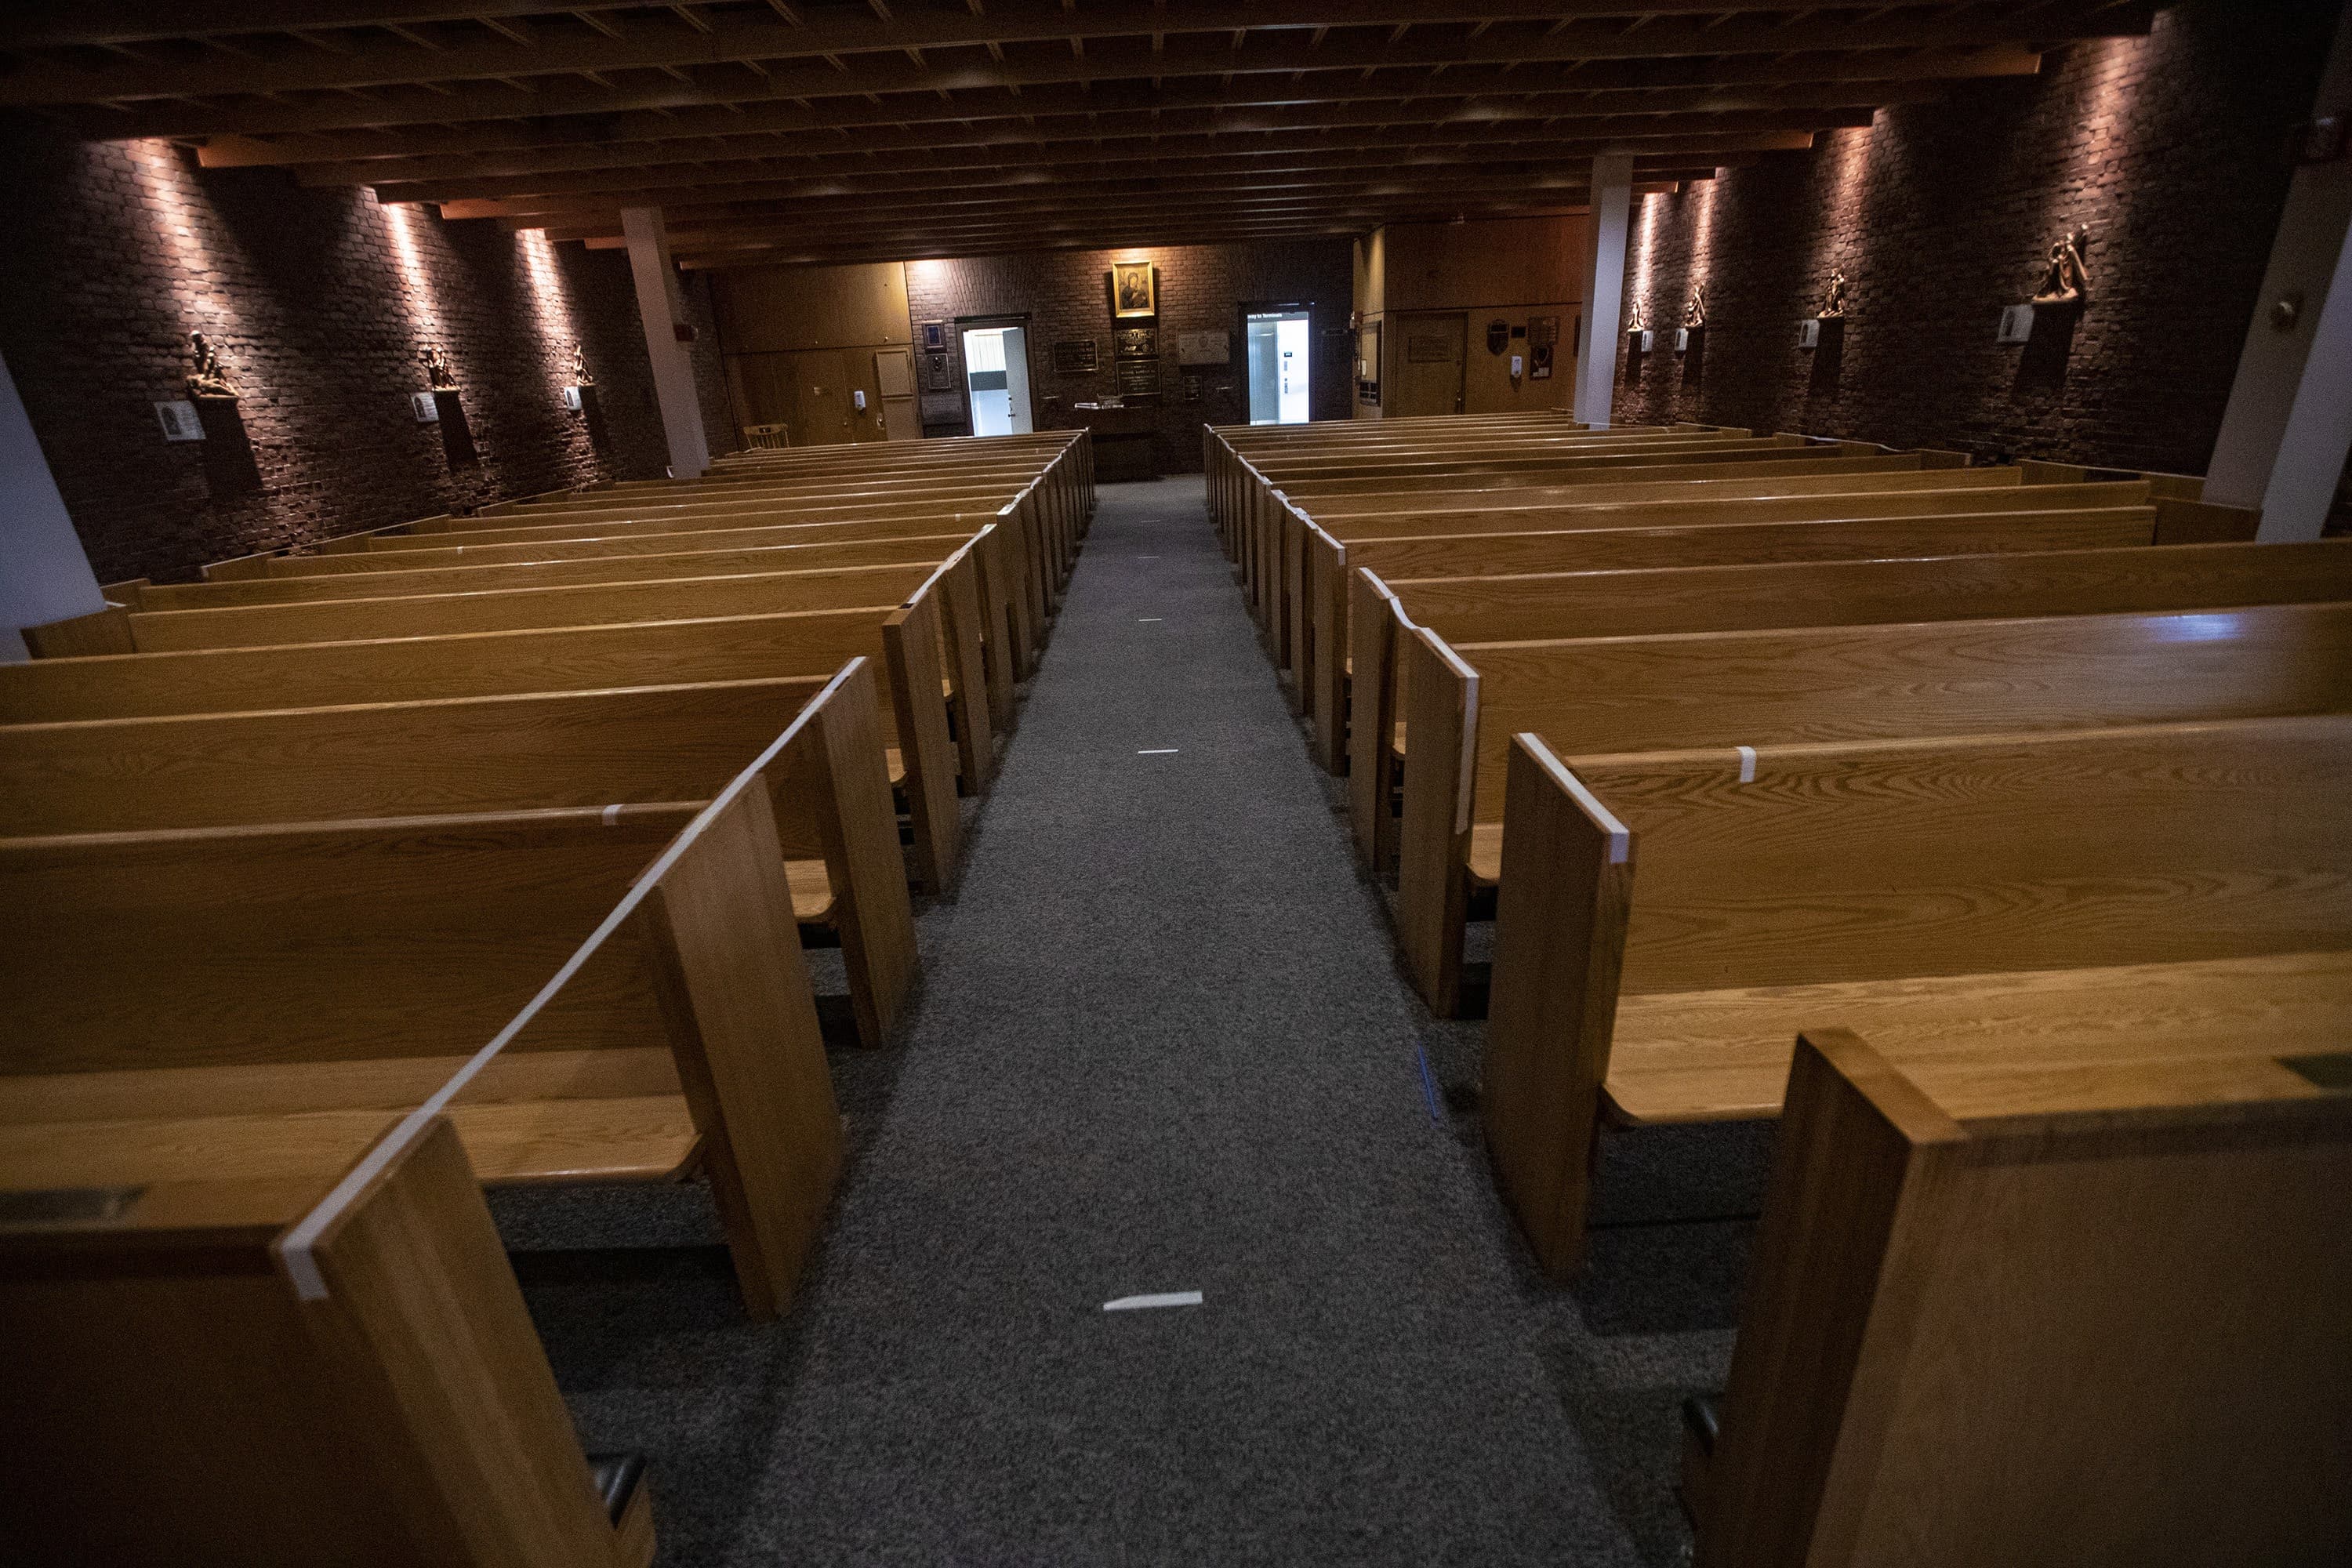 Pews are taped off, and the aisles have markings every 8 feet to ensure social distancing and reduce the spread of COVID-19 at the Our Lady of the Airways chapel at Logan Airport. (Jesse Costa/WBUR)